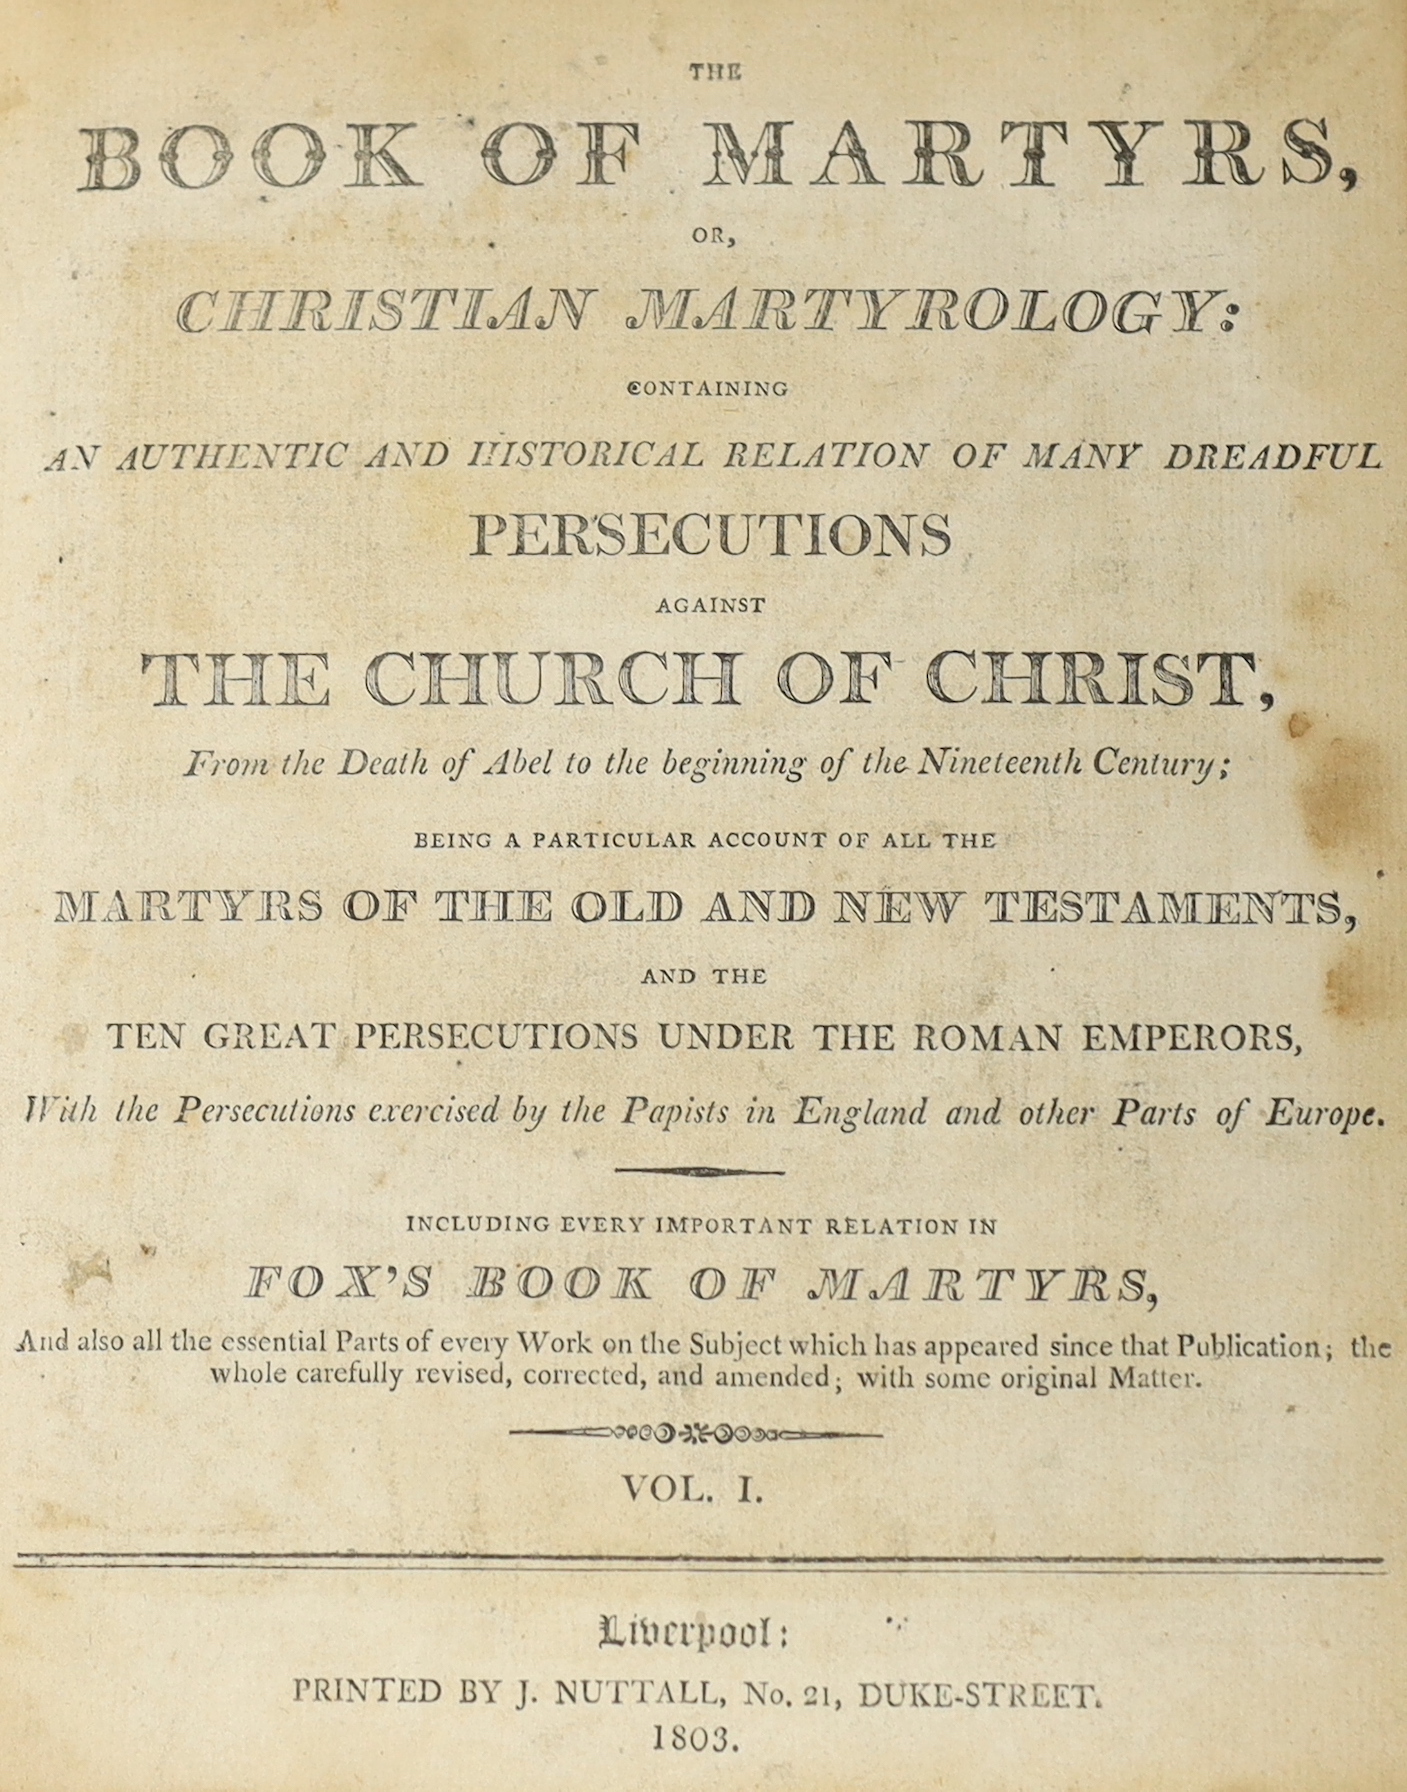 The Book of Martyrs, or Christian Martyrology....including every important relation in Fox's Book of Martyrs.... 2 vols. (in one). 20 engraved plates; old calf (distressed), sm. thick folio. Liverpool: printed by J. Nutt